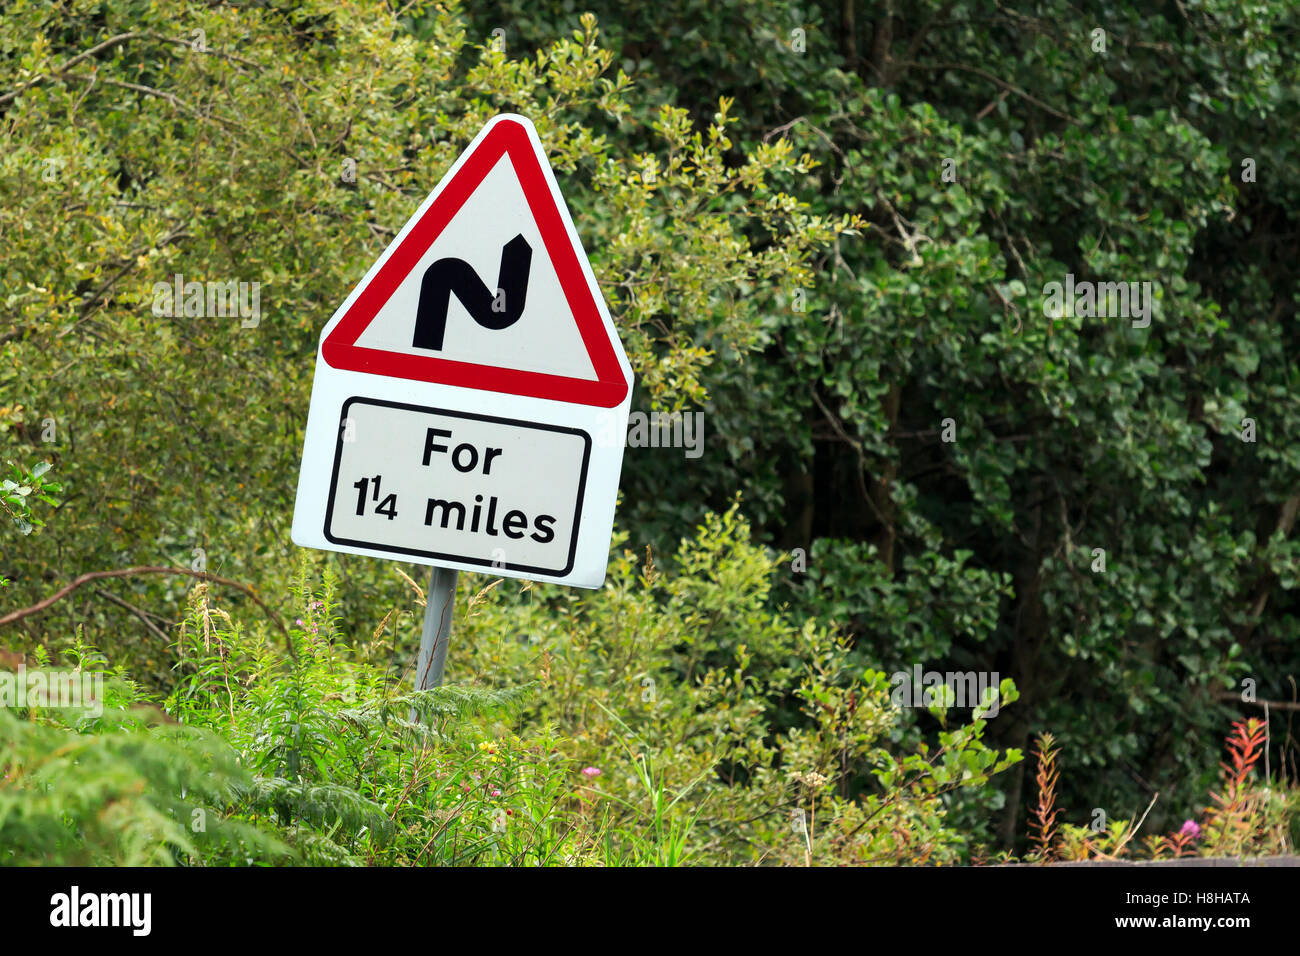 Road sign warning of Bends for one and a quarter miles Stock Photo